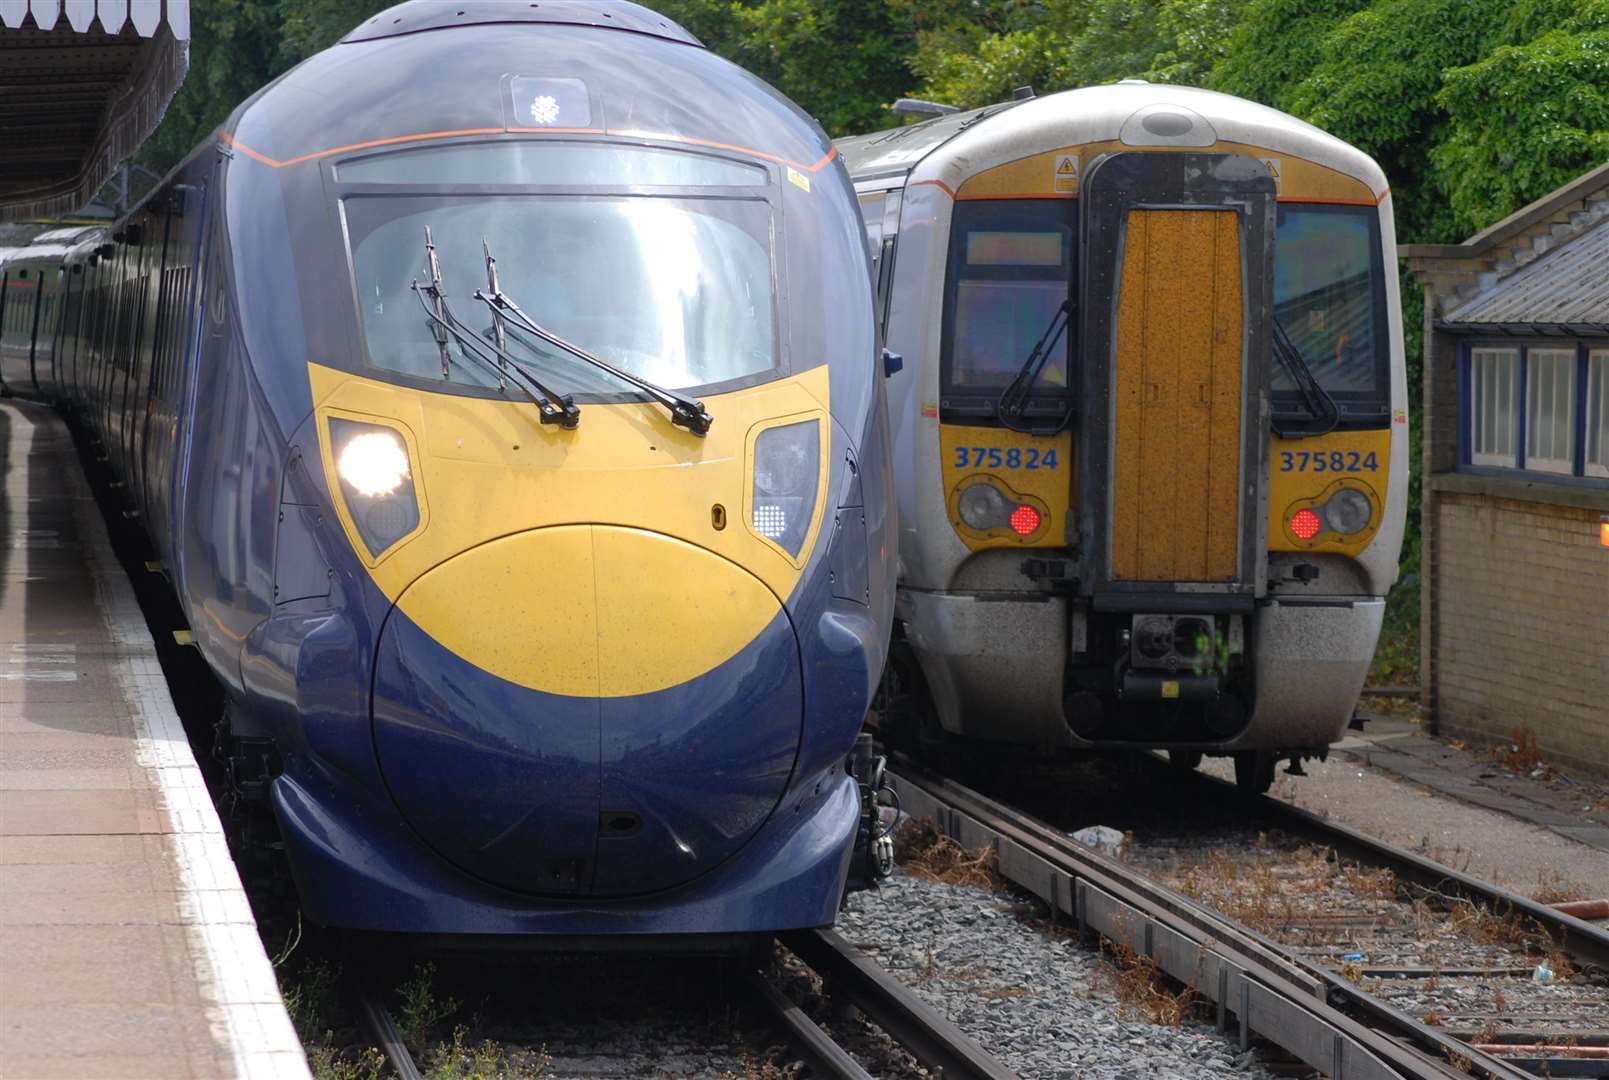 There will be several changes to rail services this weekend